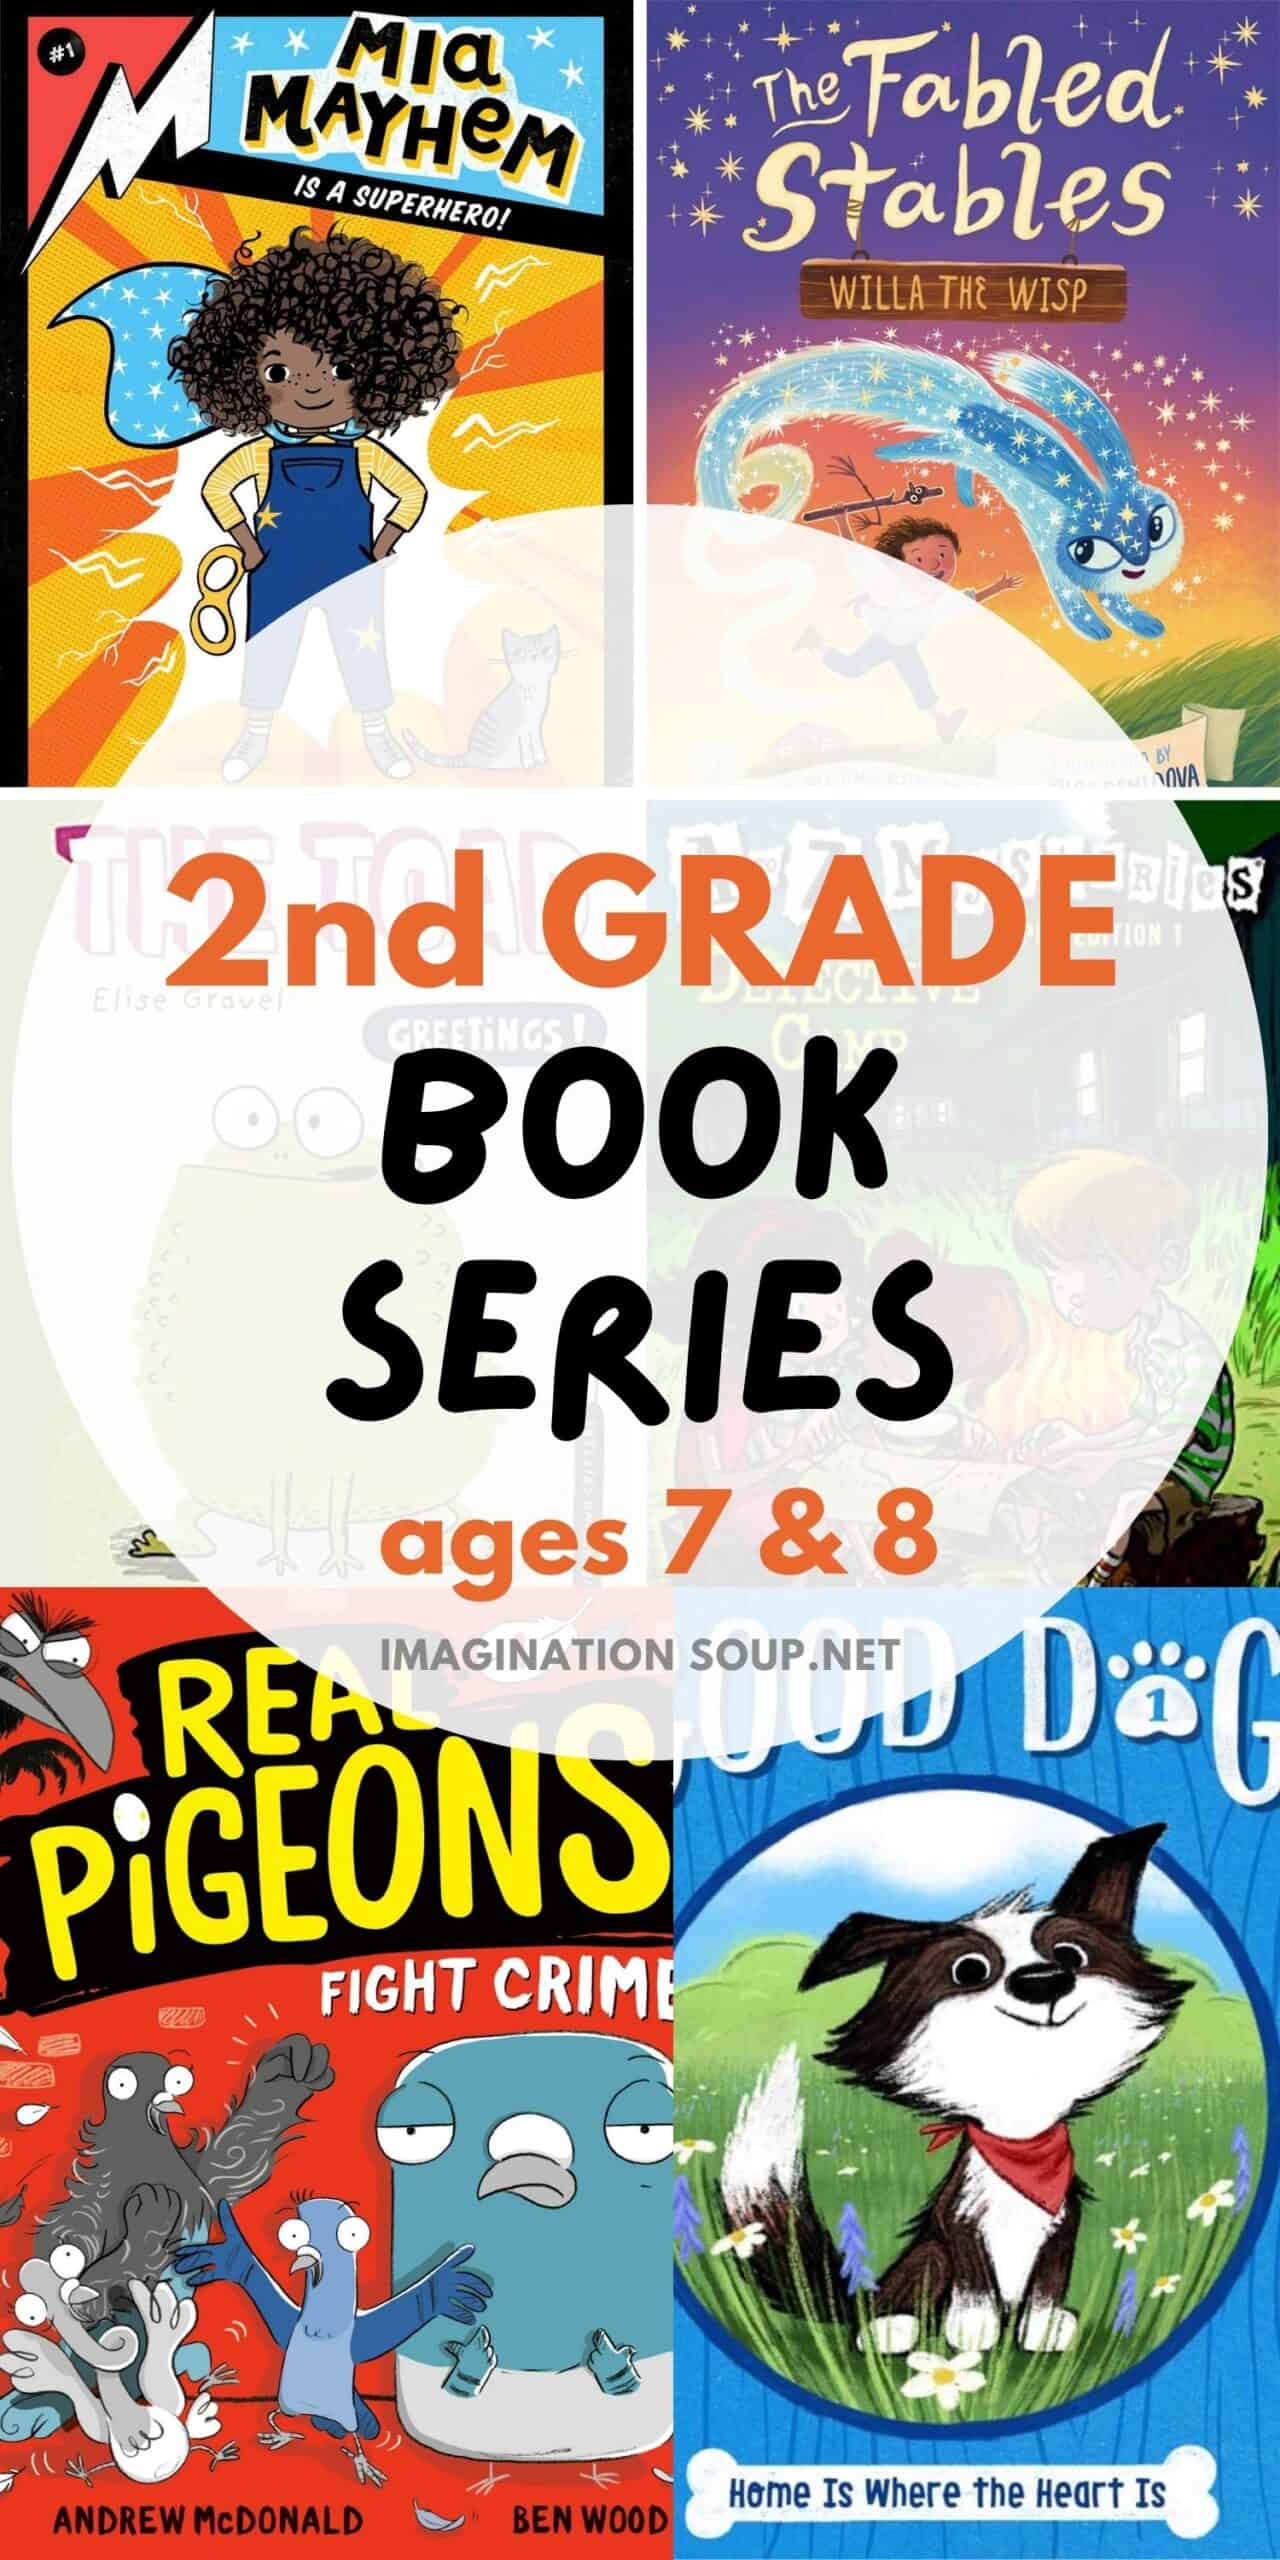 2nd grade book series for ages 7 and 8